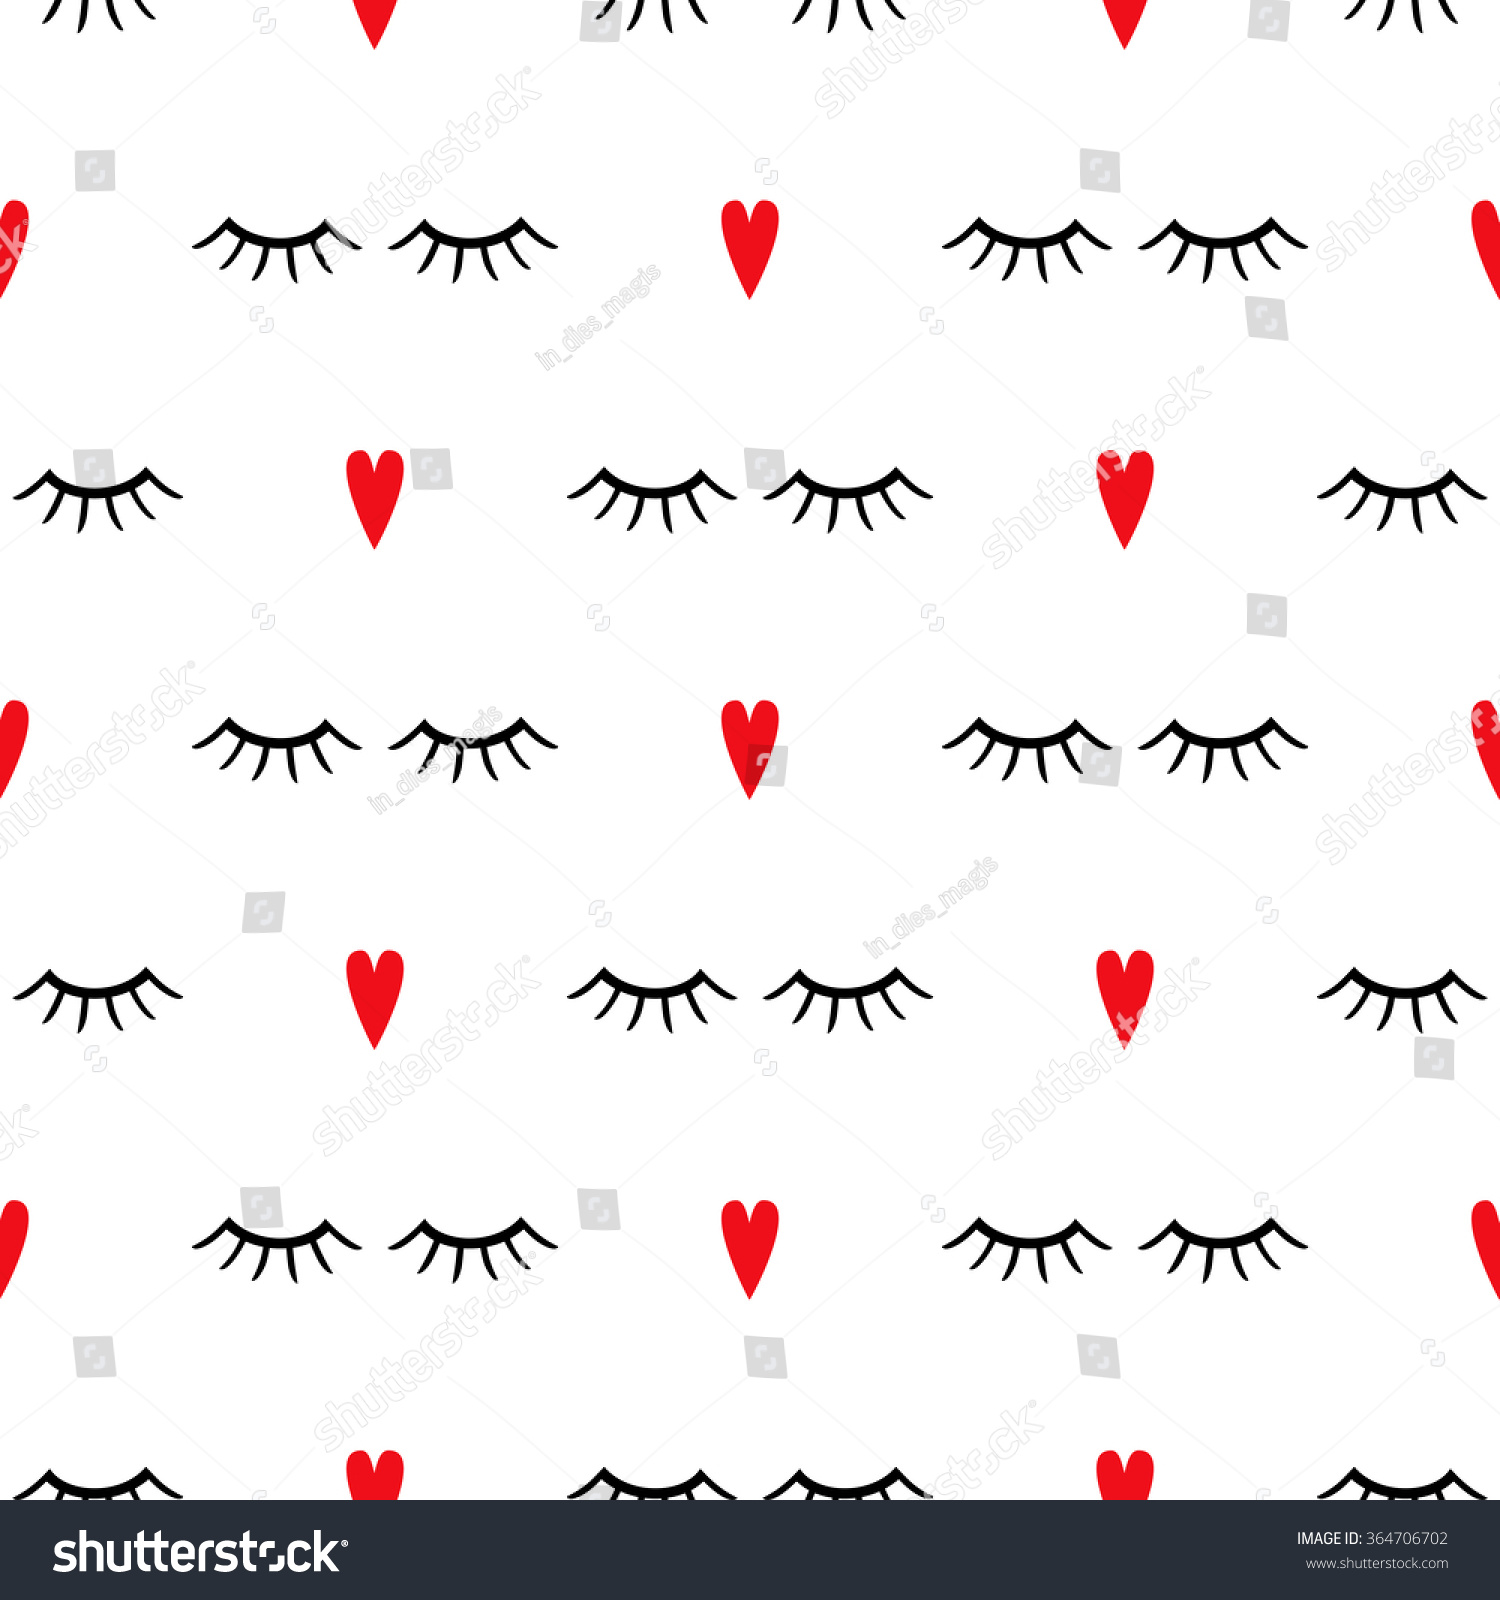 SVG of Abstract pattern with closed eyes and red hearts. Cute eyelashes background illustration. svg